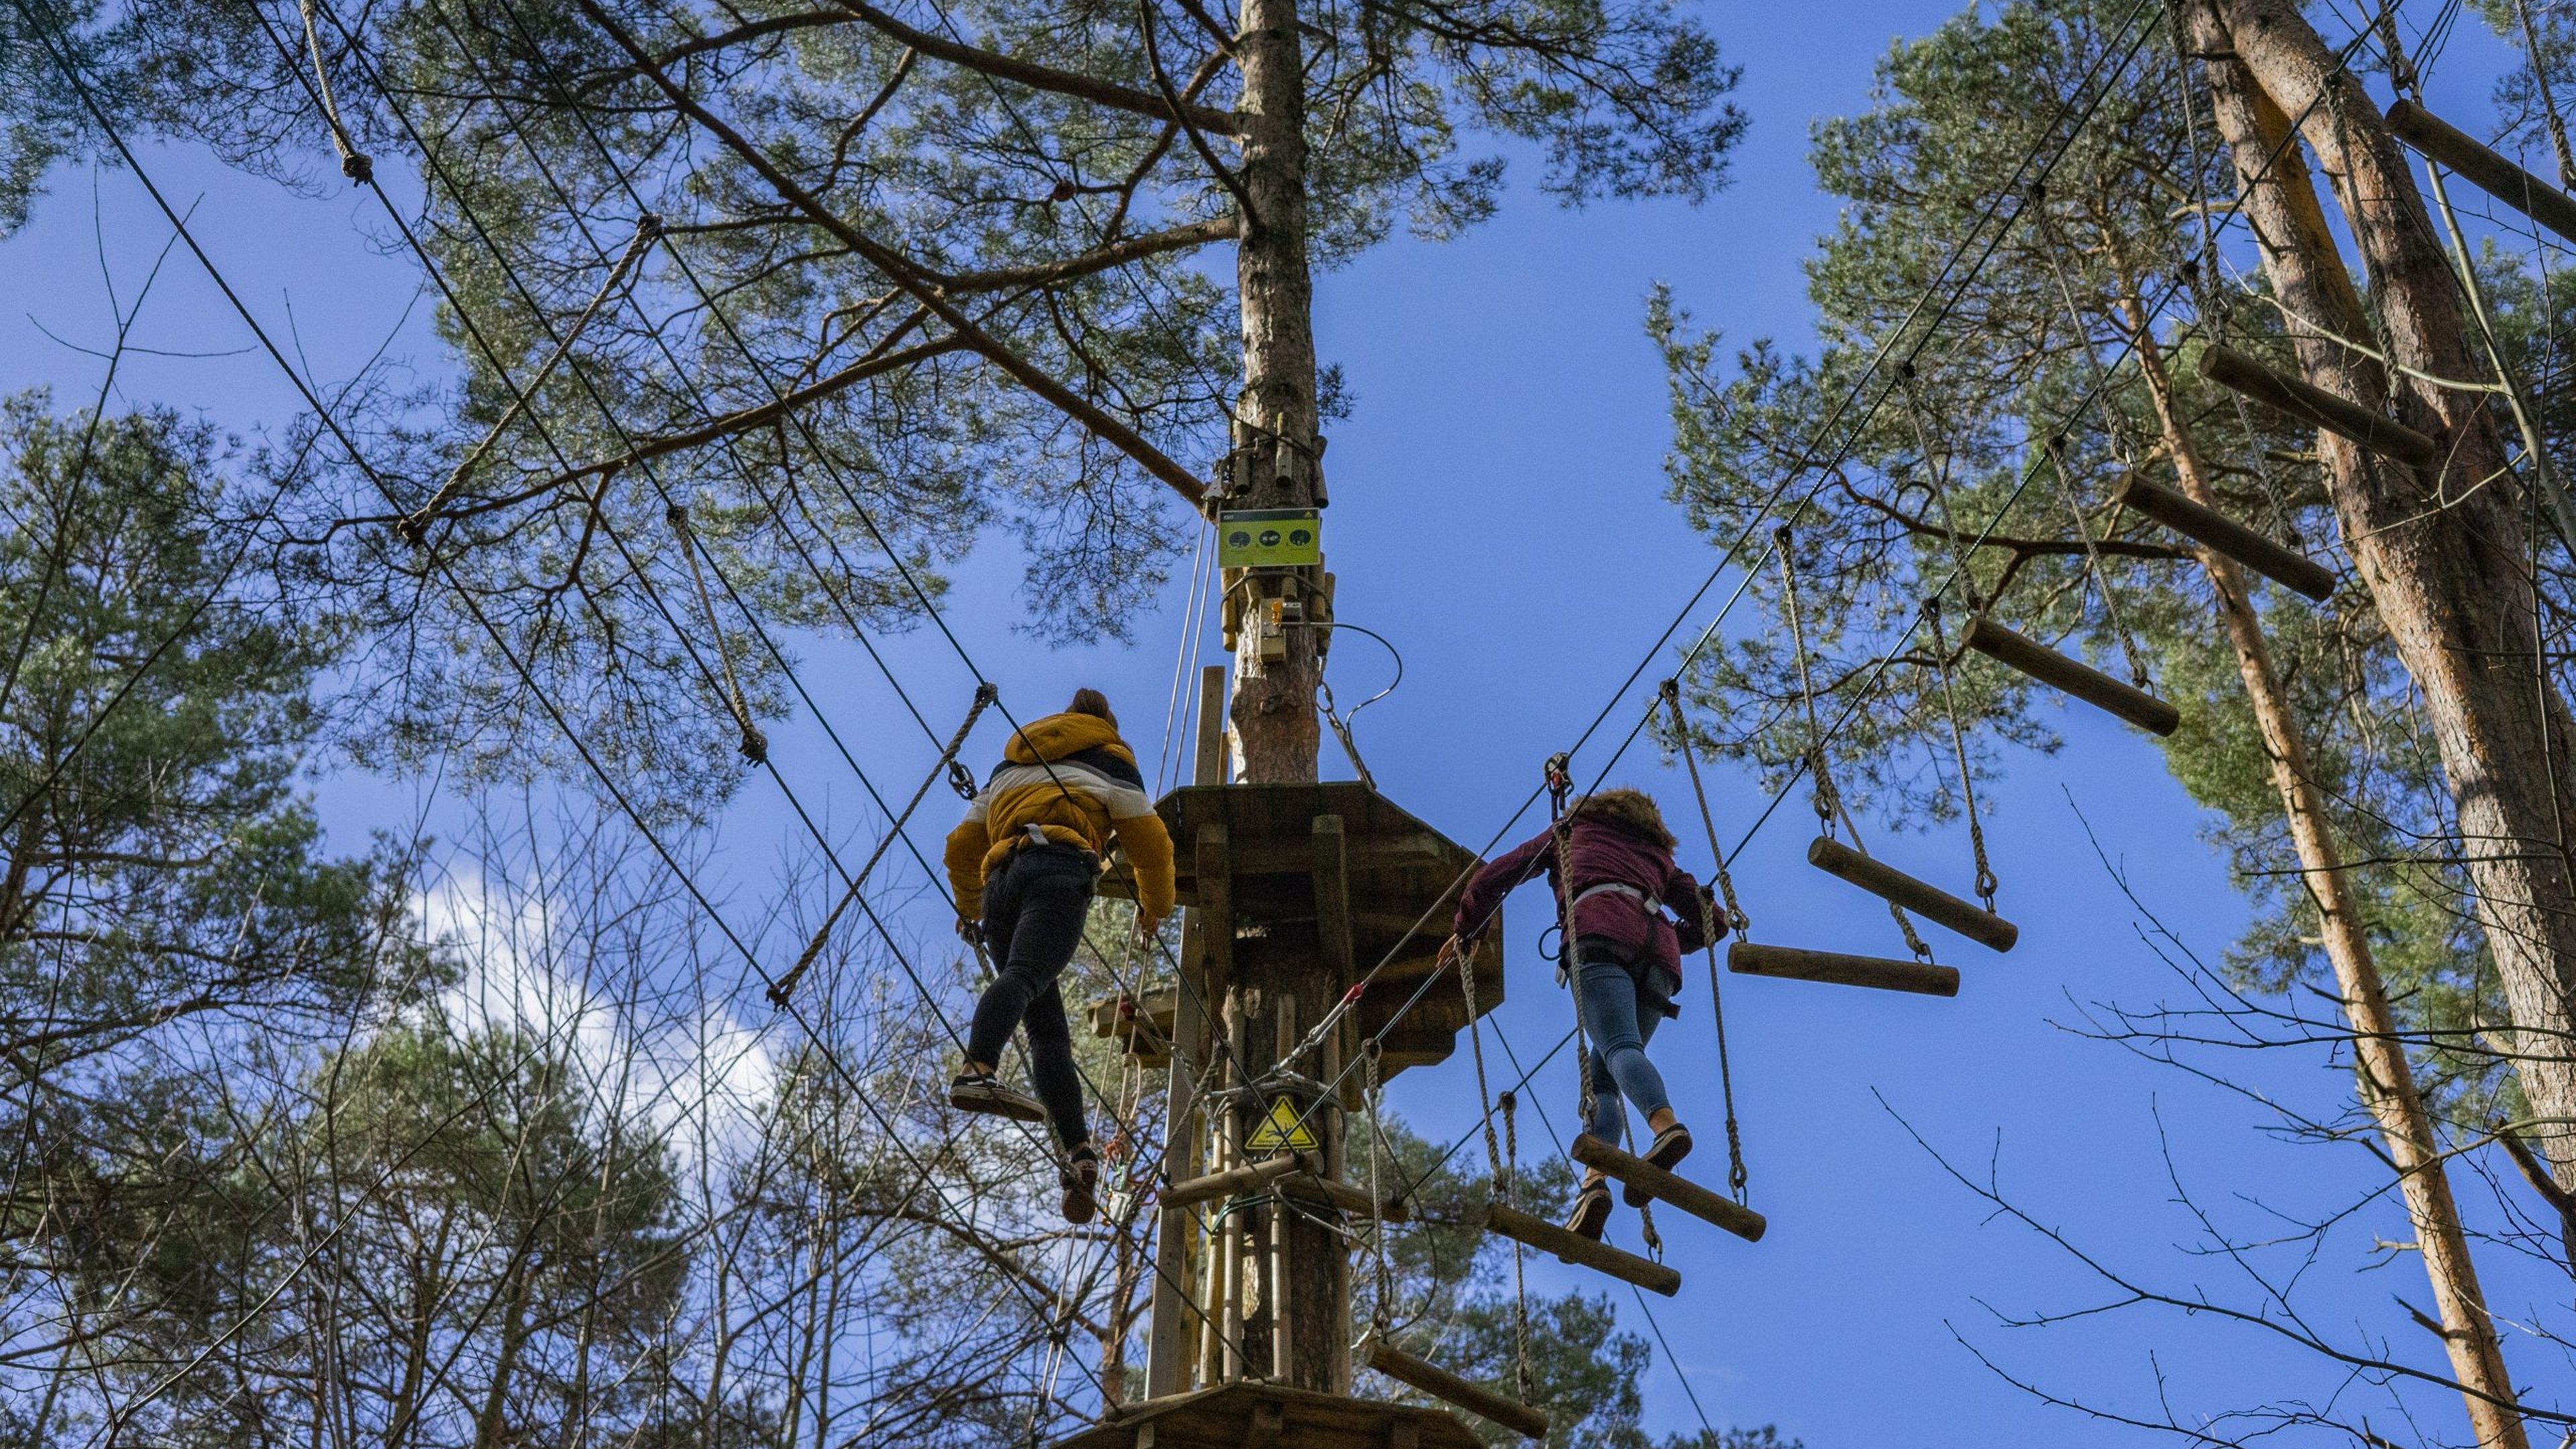 Go Ape in Bedgebury Forest